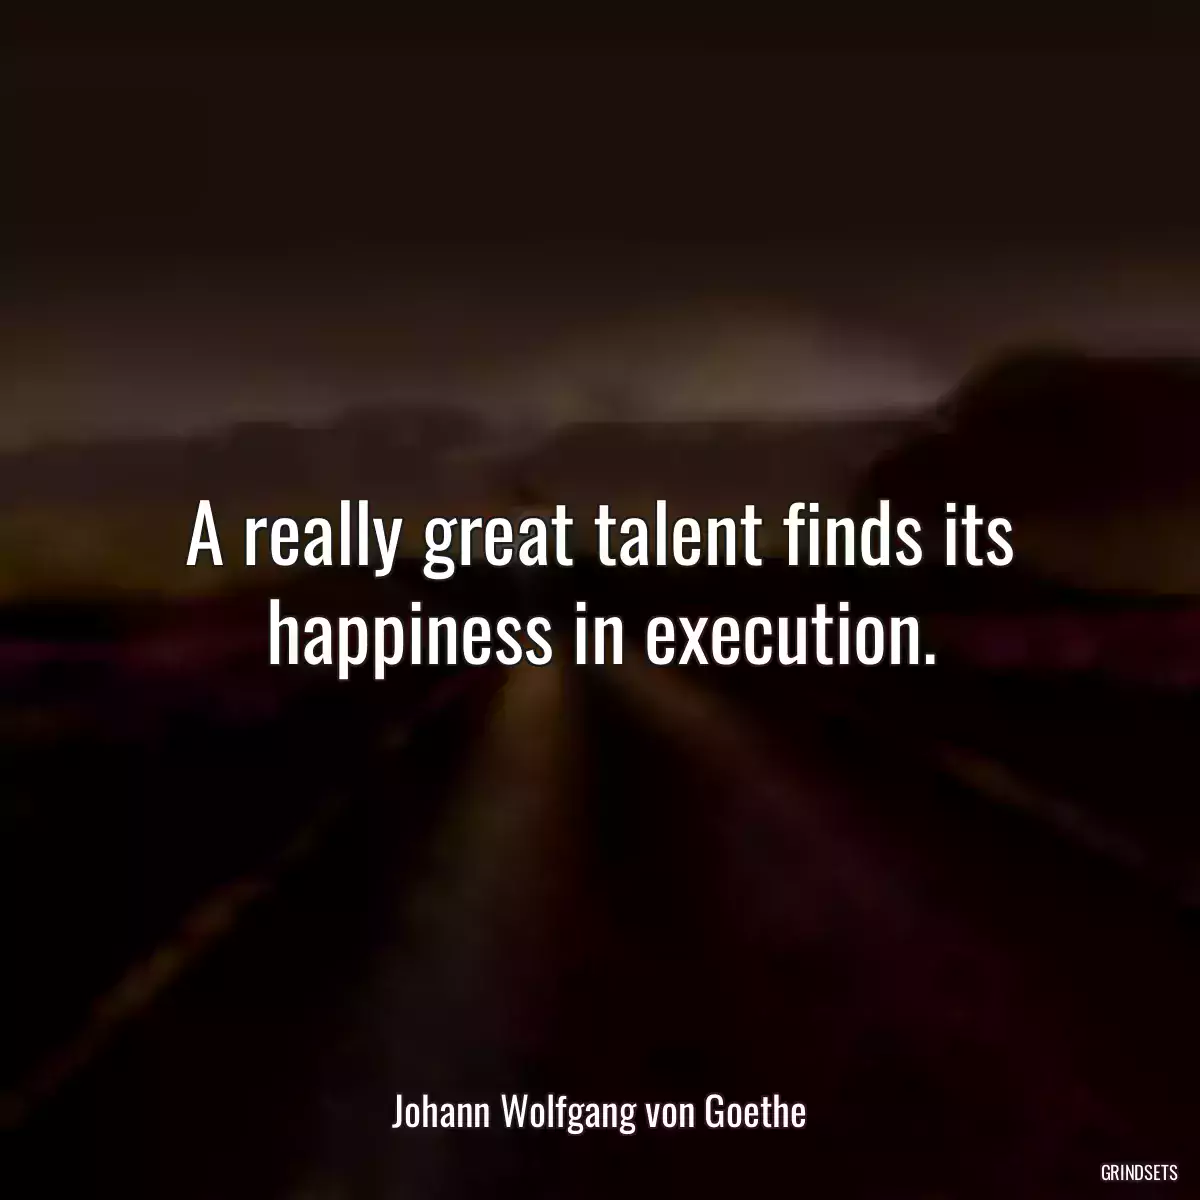 A really great talent finds its happiness in execution.